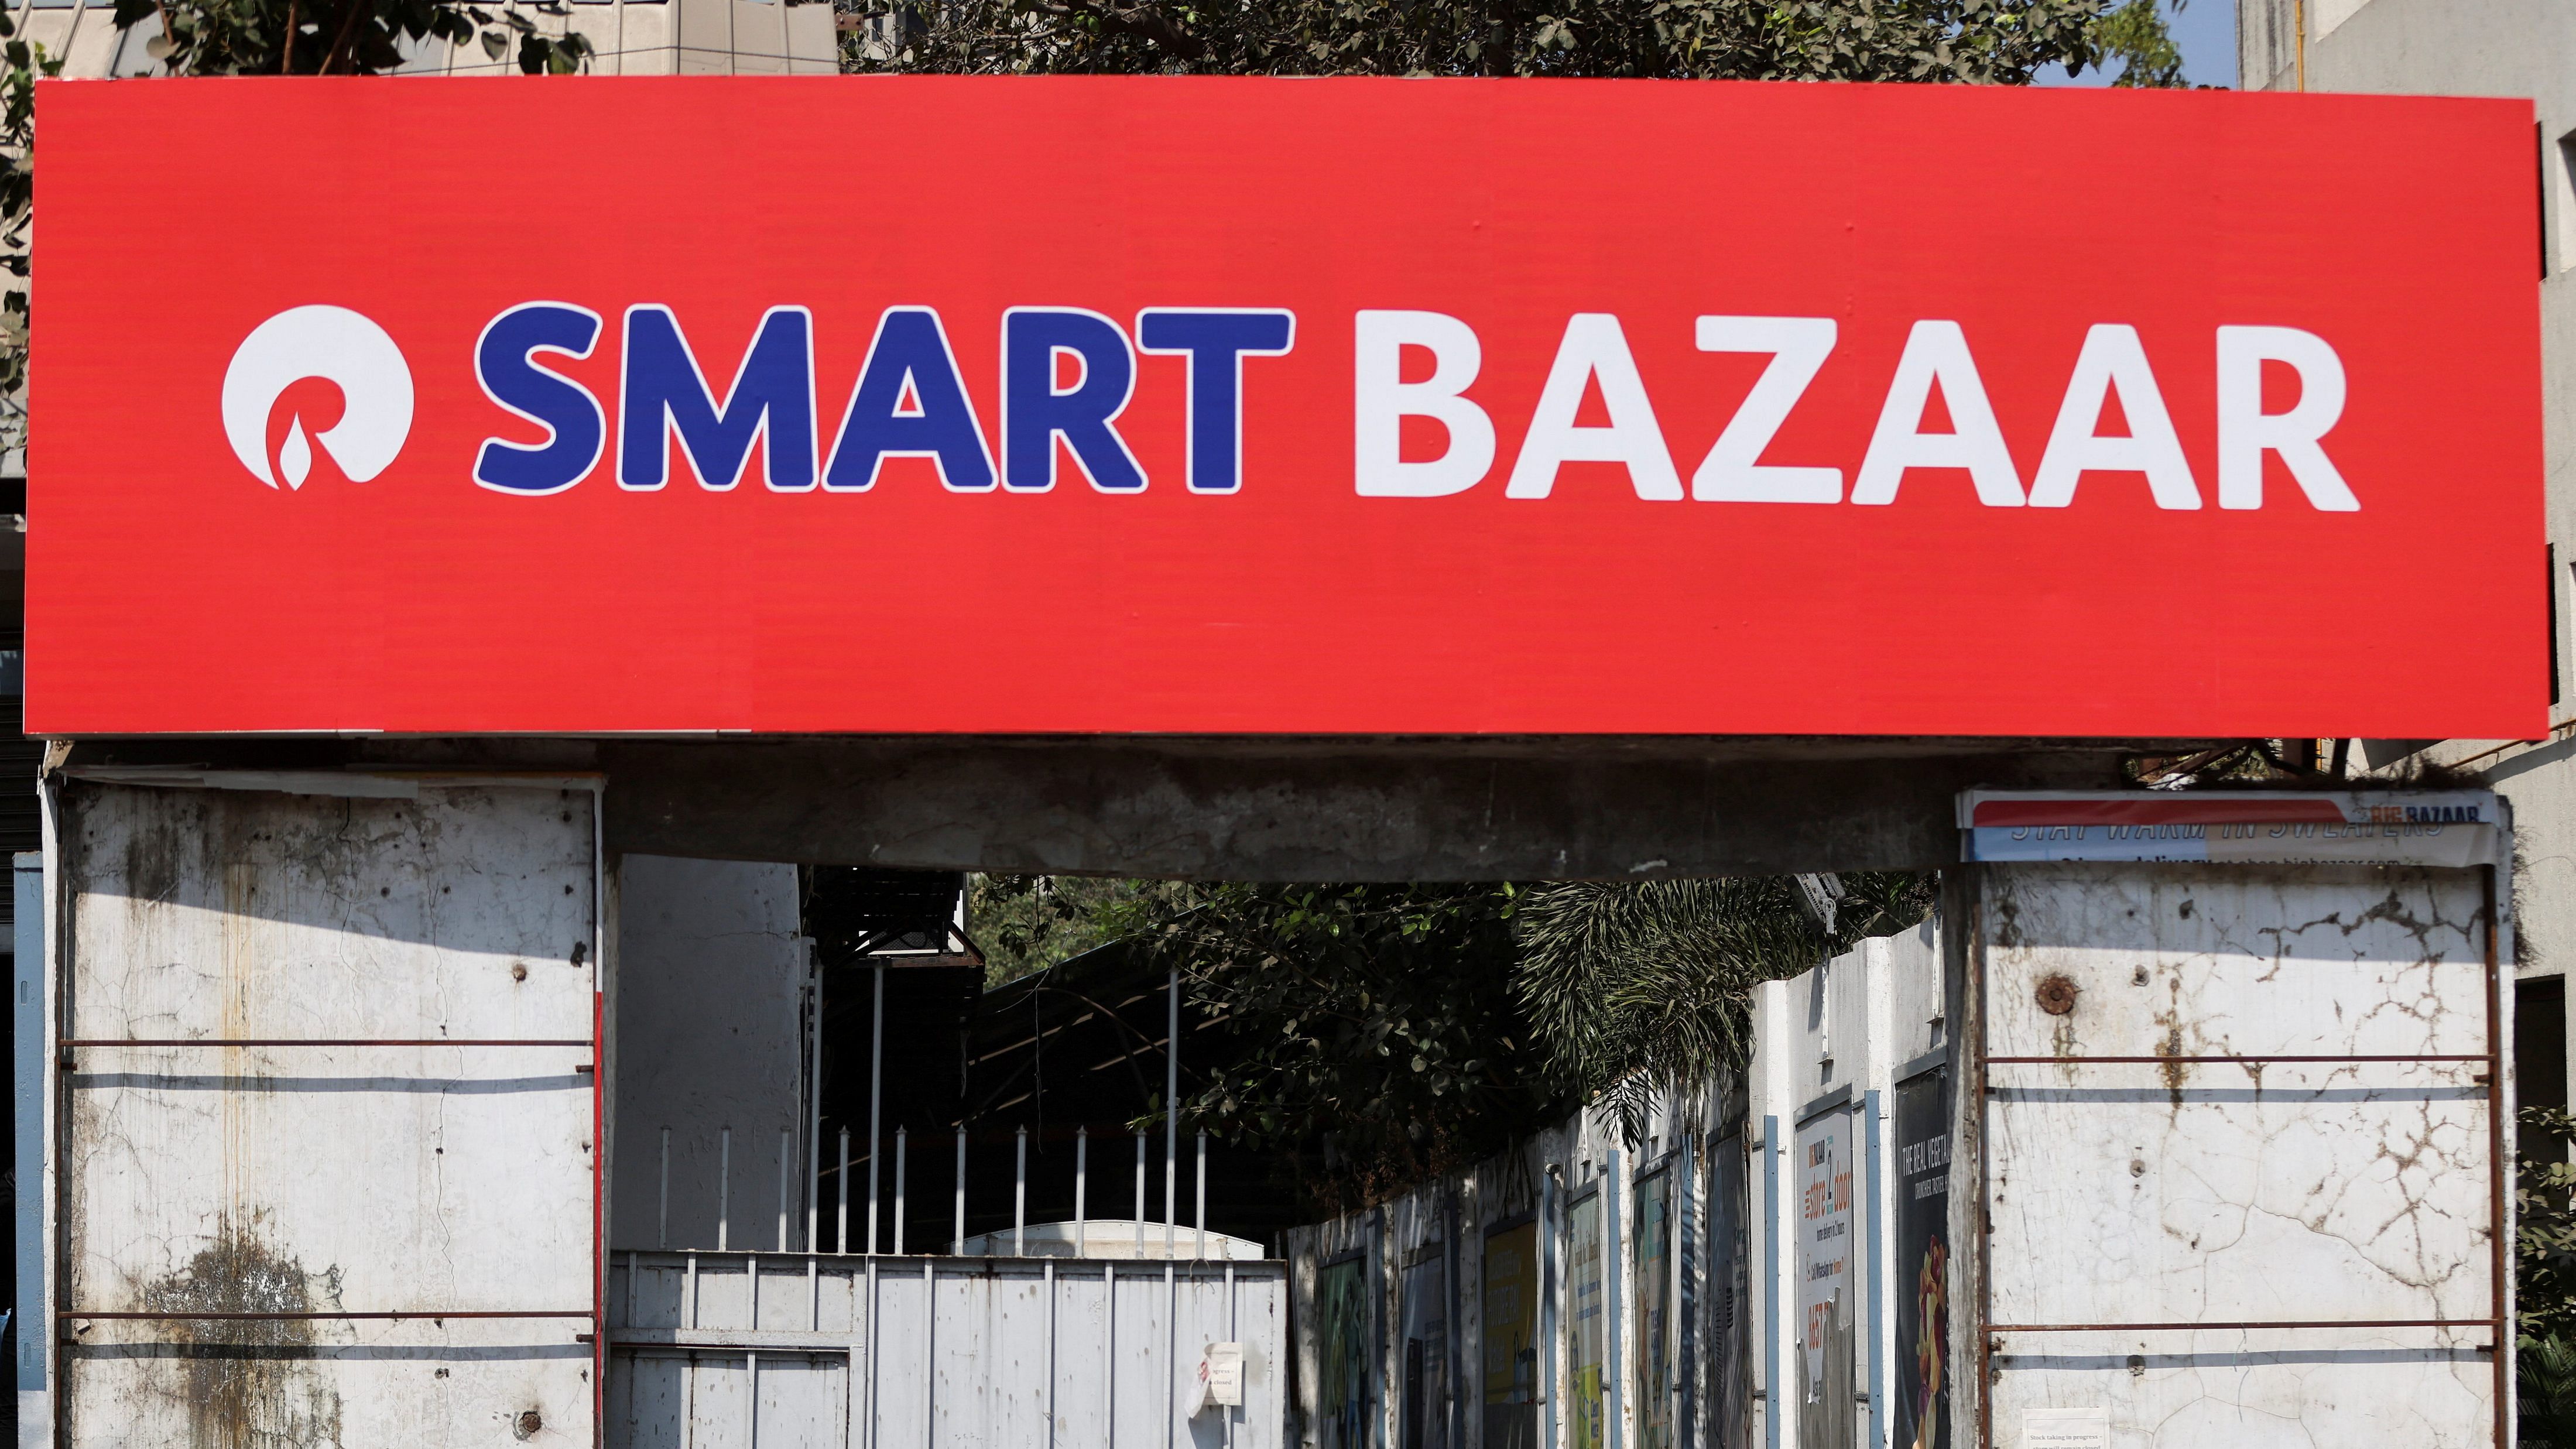 In August 2020, Reliance announced a Rs 24,713 crore deal to acquire 19 Future group companies operating in retail, wholesale, logistics and warehousing segments. Credit: Reuters Photo